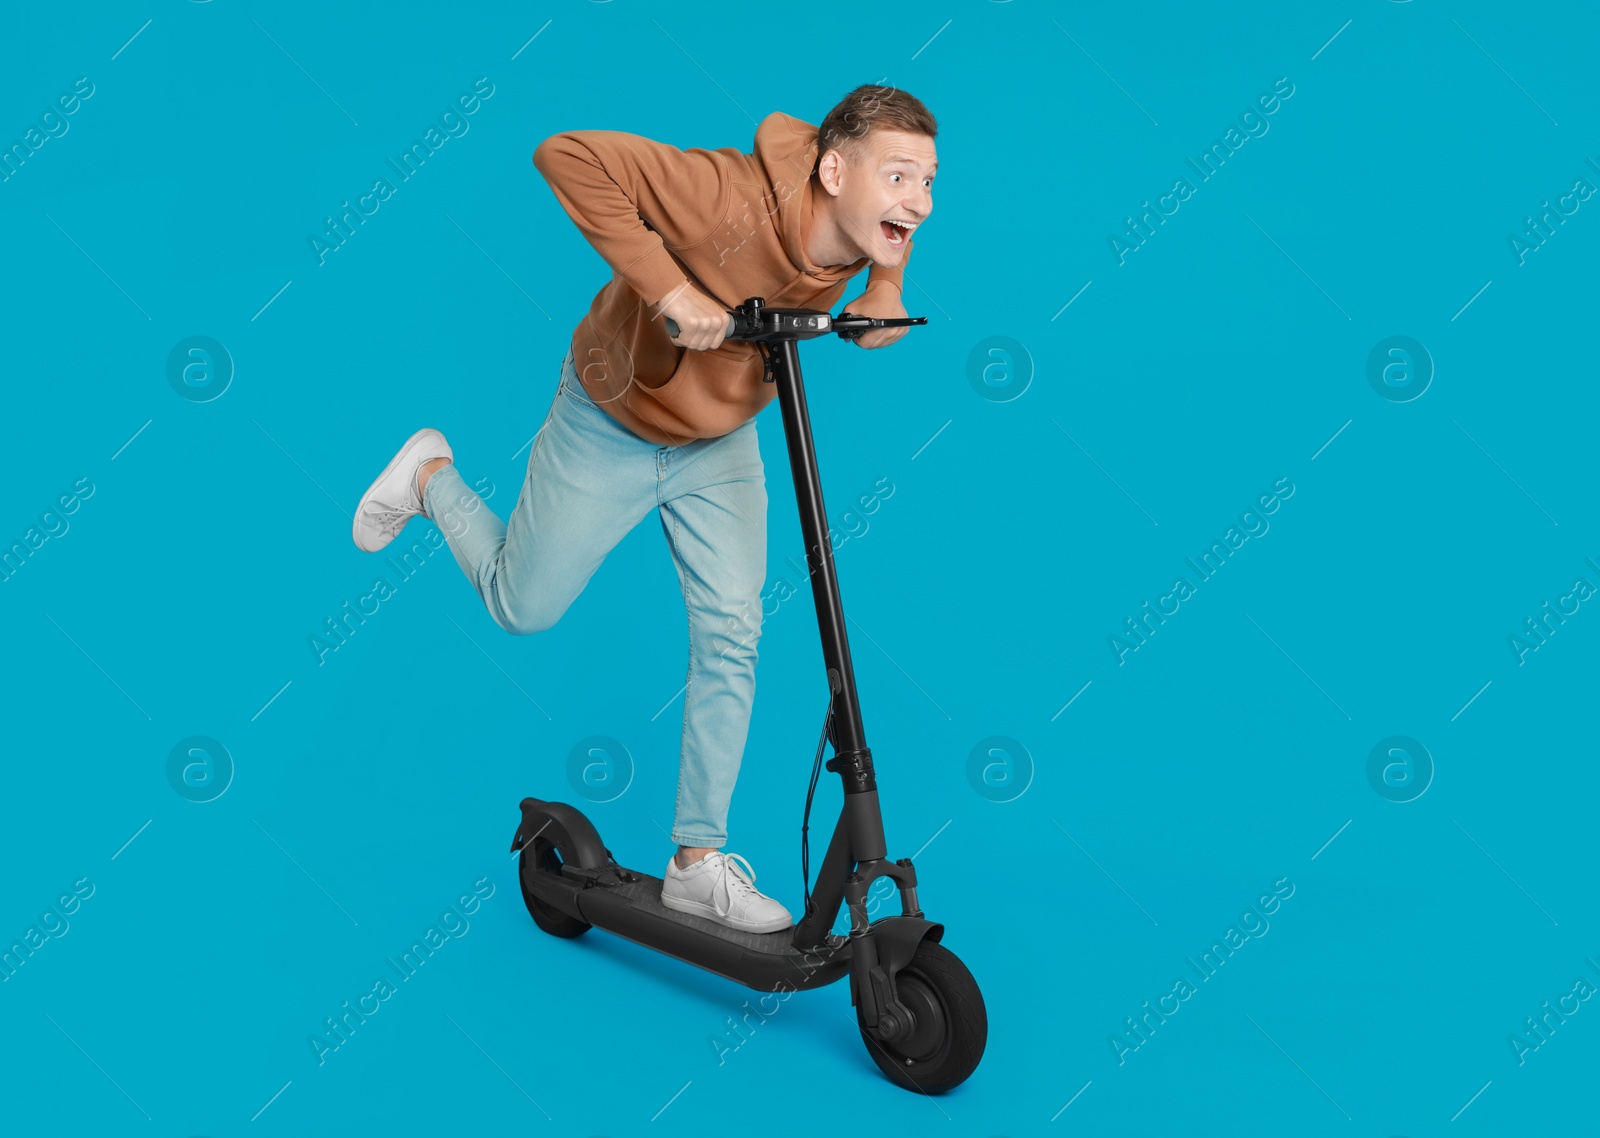 Photo of Emotional man riding modern electric kick scooter on light blue background